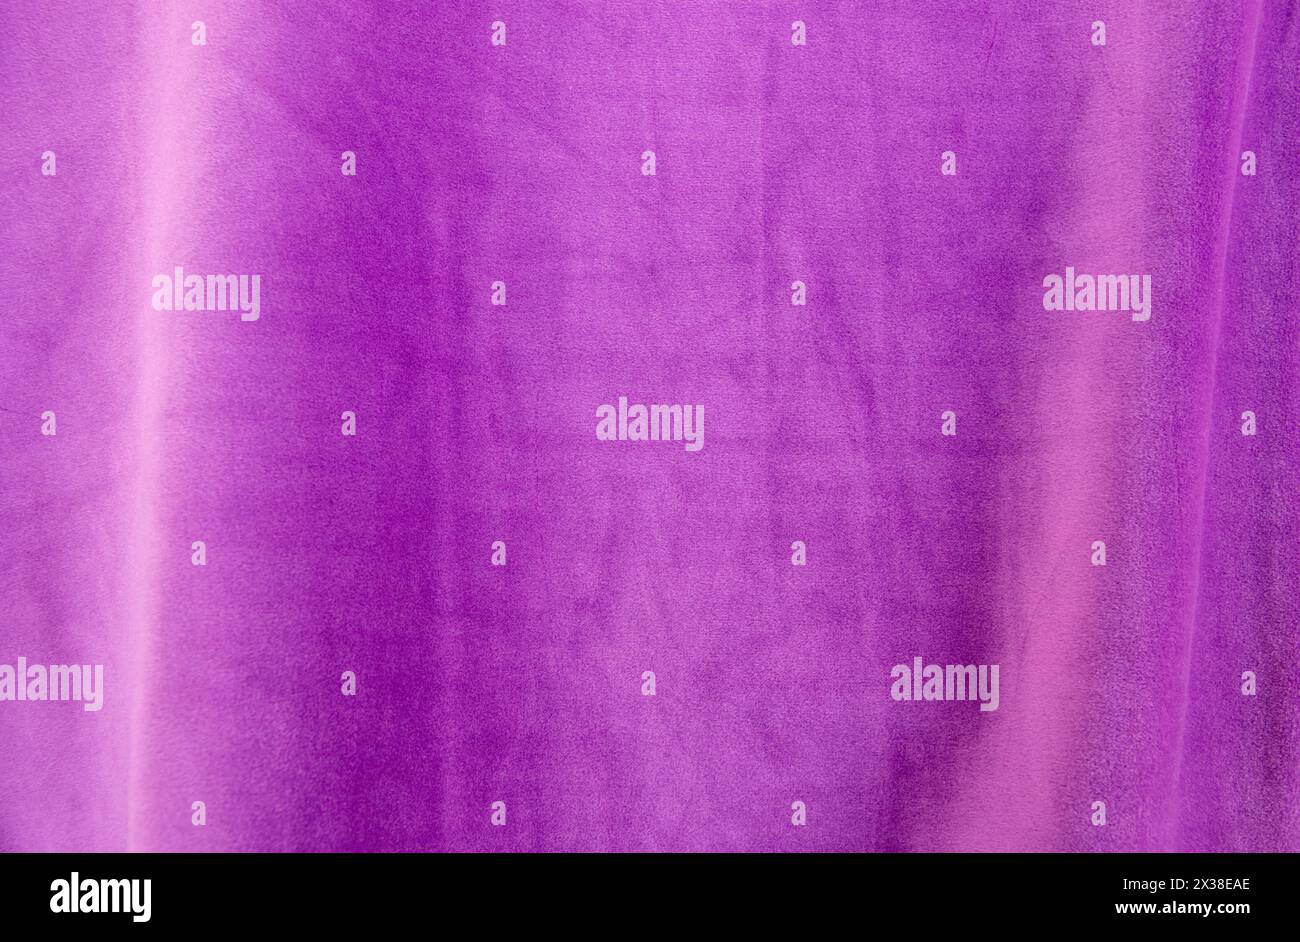 Lilac knitted texture fabric. Purple textile cloth background. Soft material for fashion clothes. Stock Photo